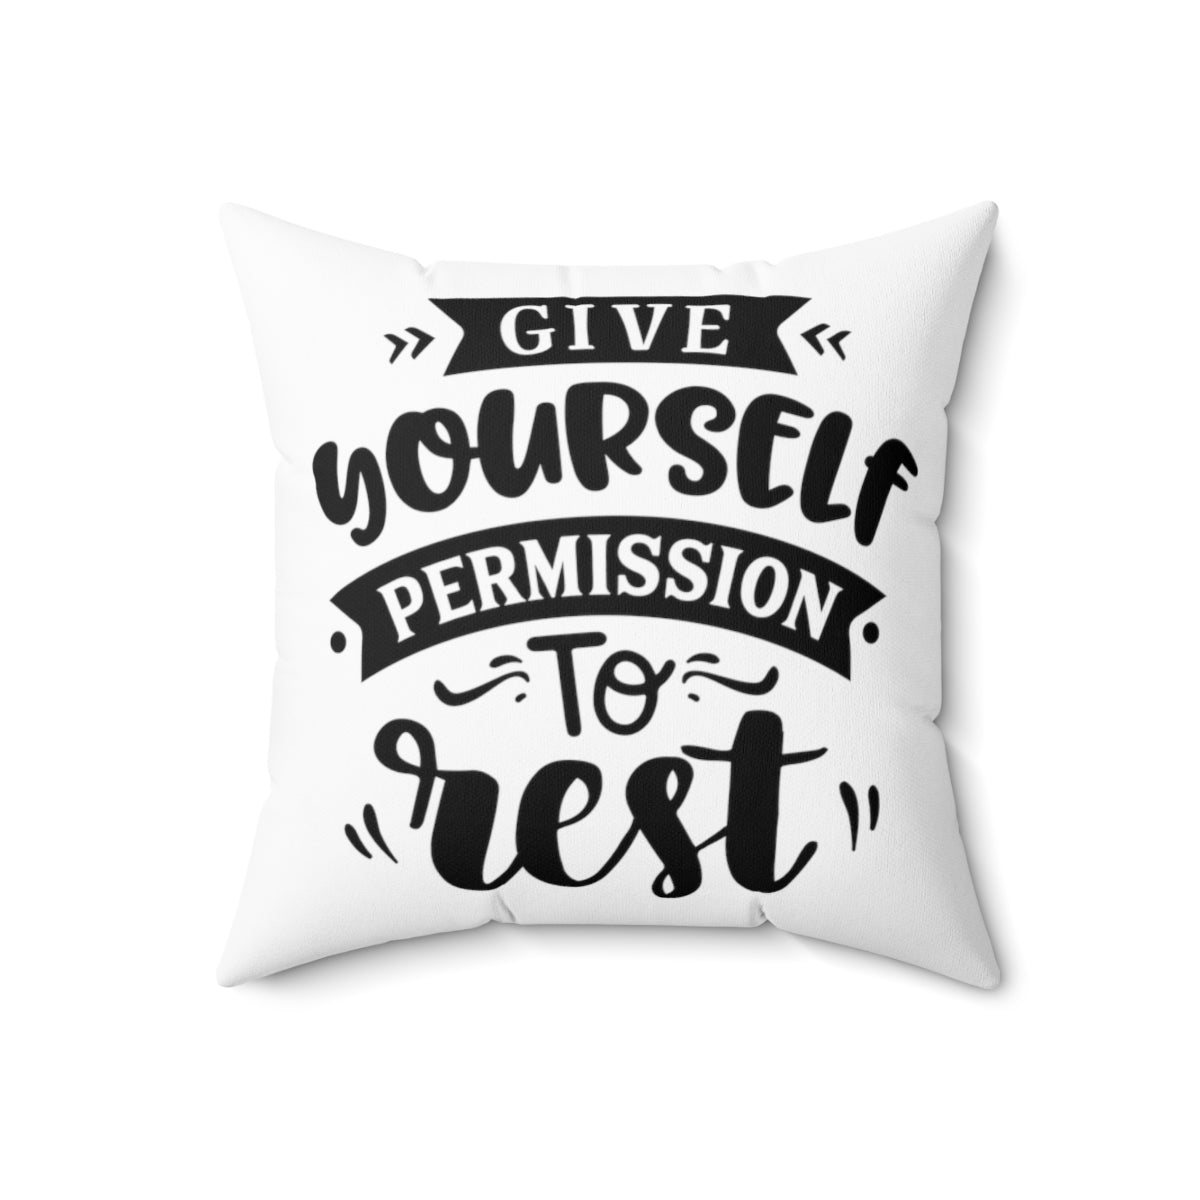 Farmhouse Decor - Give Yourself Permission To Rest